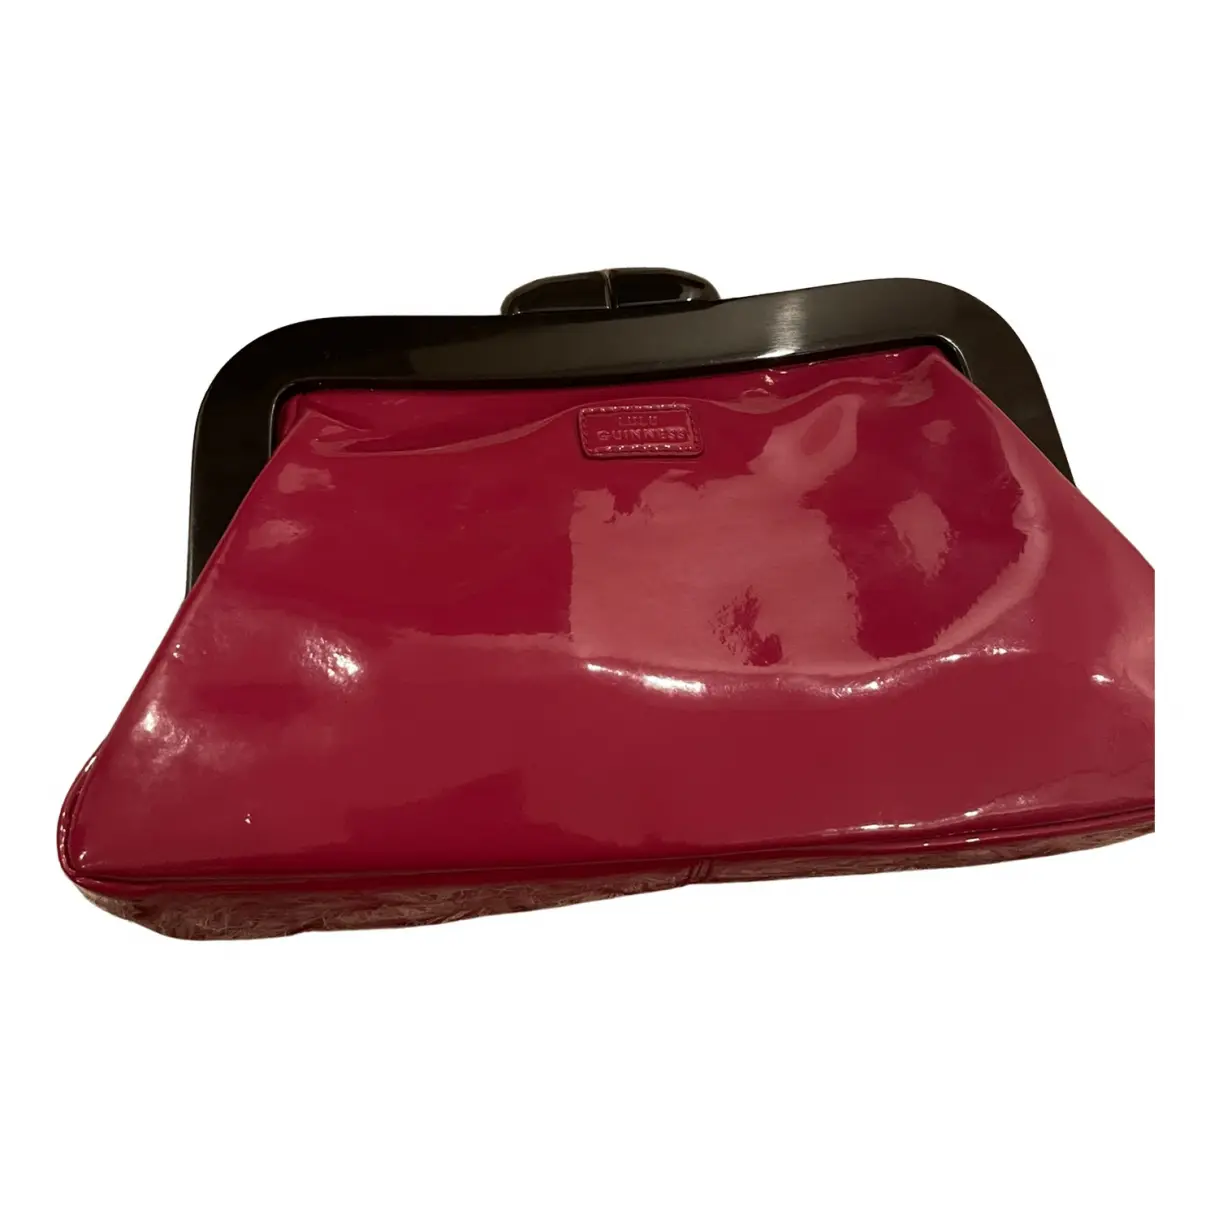 Patent leather clutch bag Lulu Guinness